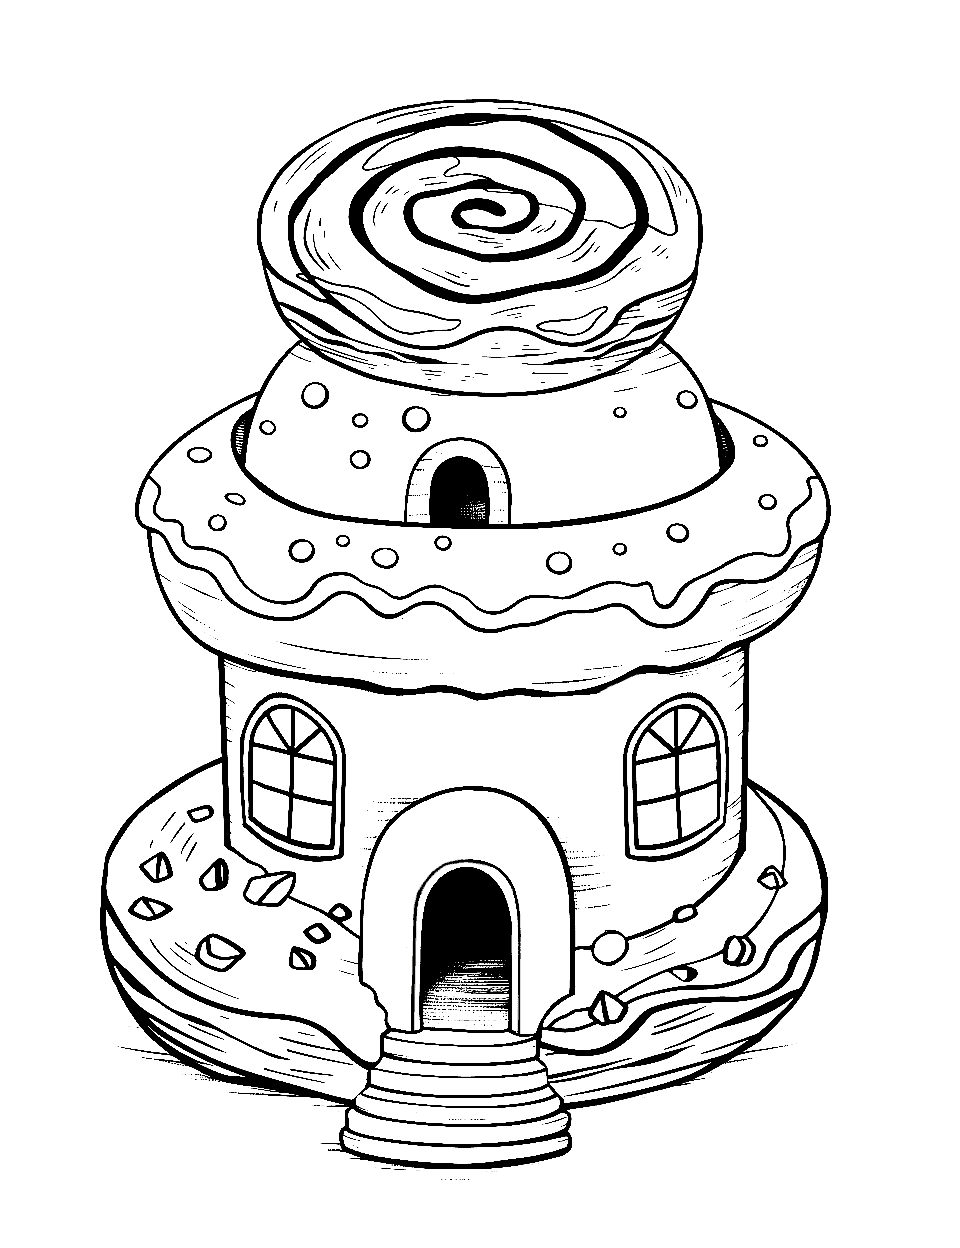 Donut Palace Coloring Page - A scrumptious palace made of donuts.